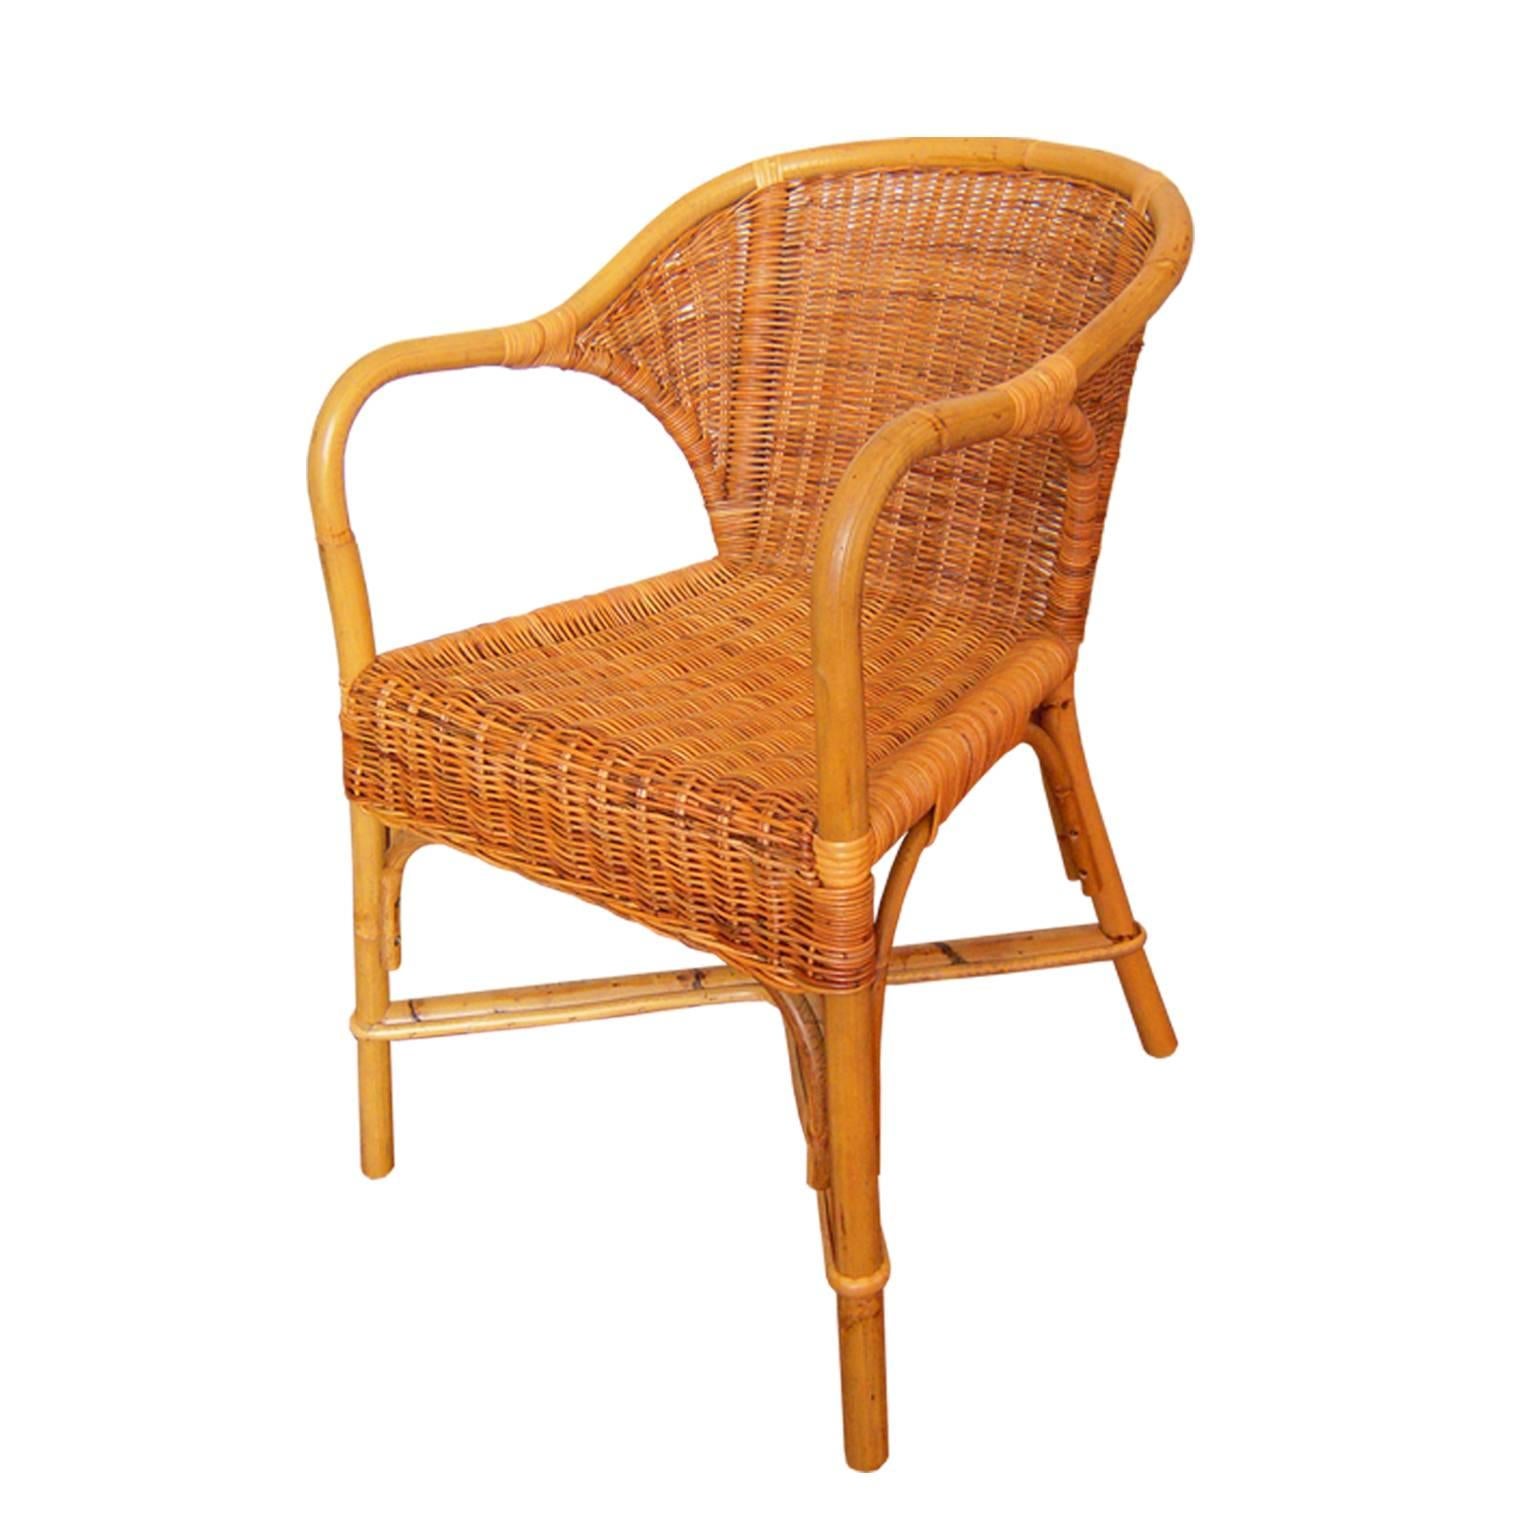 Set of 4 wicker wingback chairs encapsulate Italian crafty wisdom to intertwine natural fibres.
Ideal for both indoor and outdoor use.
They were designed by the famous Architect Gae Aulenti in the circa 1990 to Abaco (Italian manufacturer).
Gae